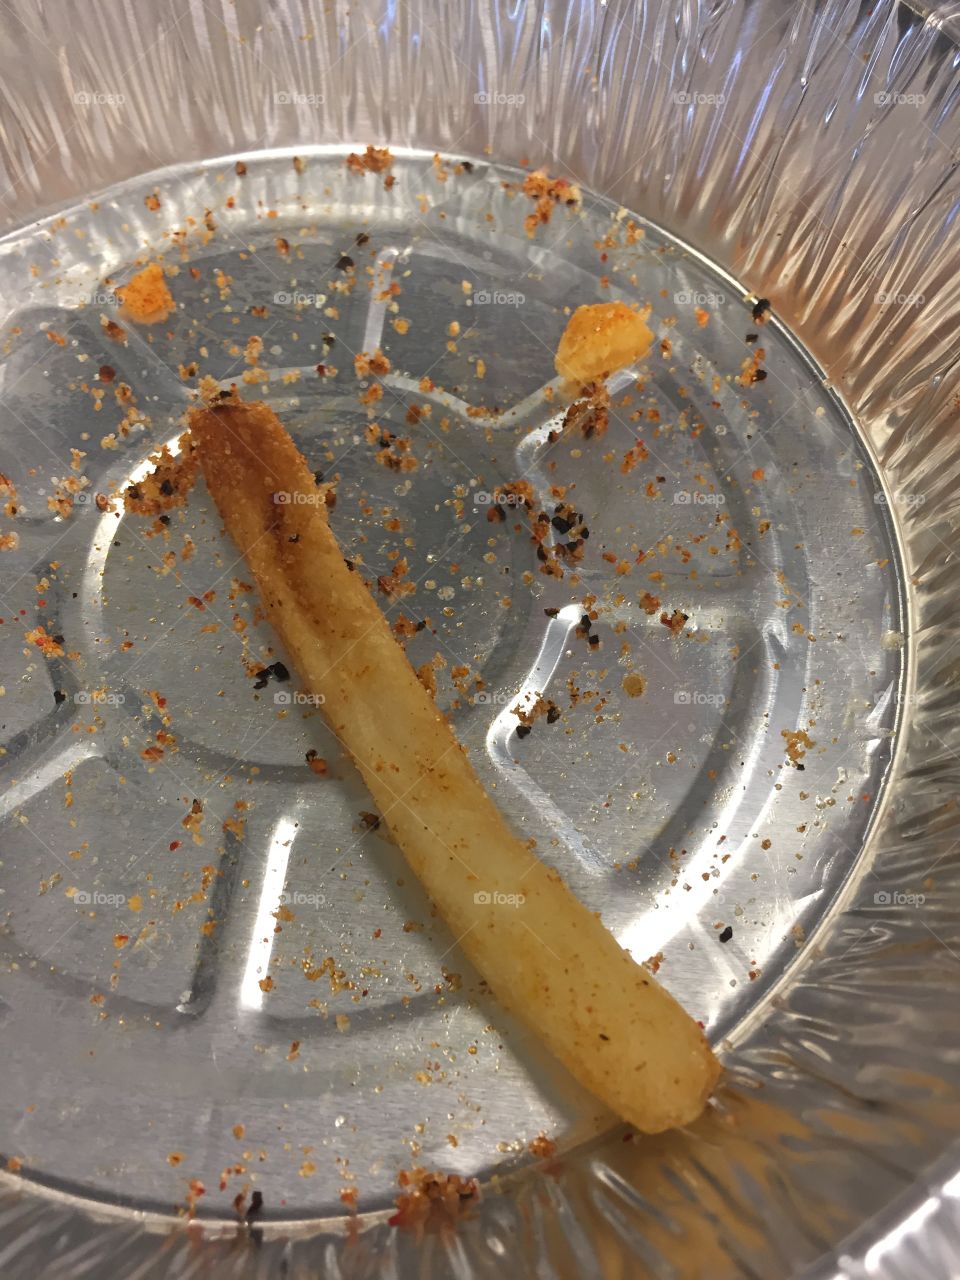 The last French fry left